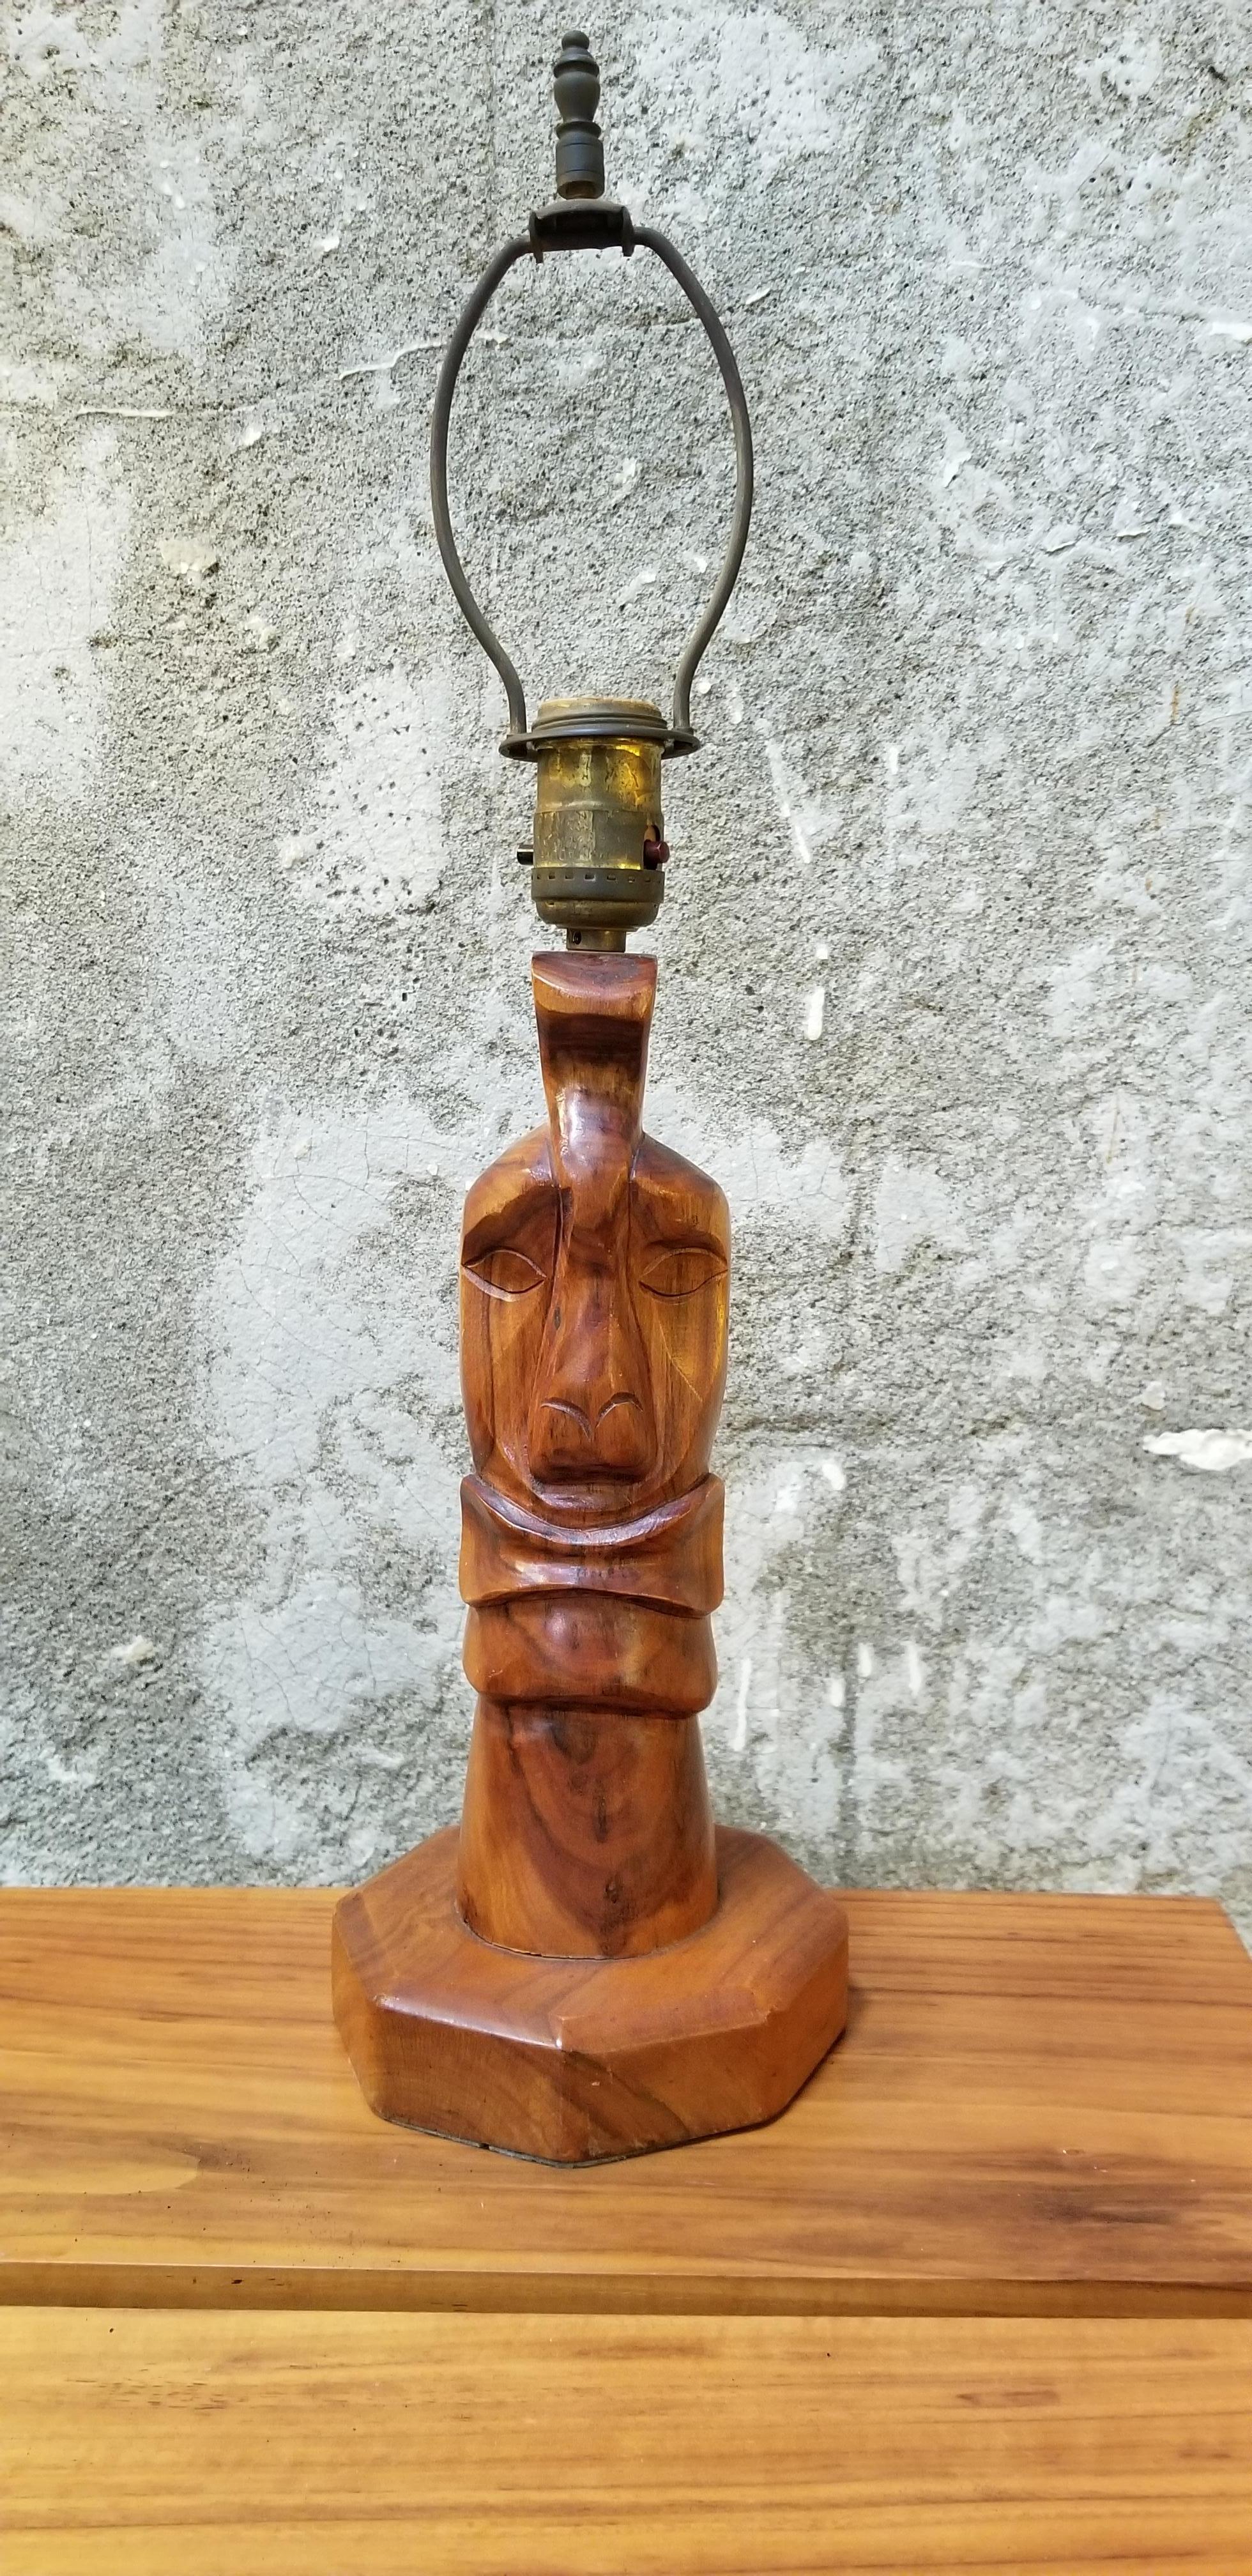 Exotic hand carved wood table lamp made of Monkeypod wood. South Pacific origin attributed to Hawaii. Shade is new, circa 1950s-1960s. New shade.